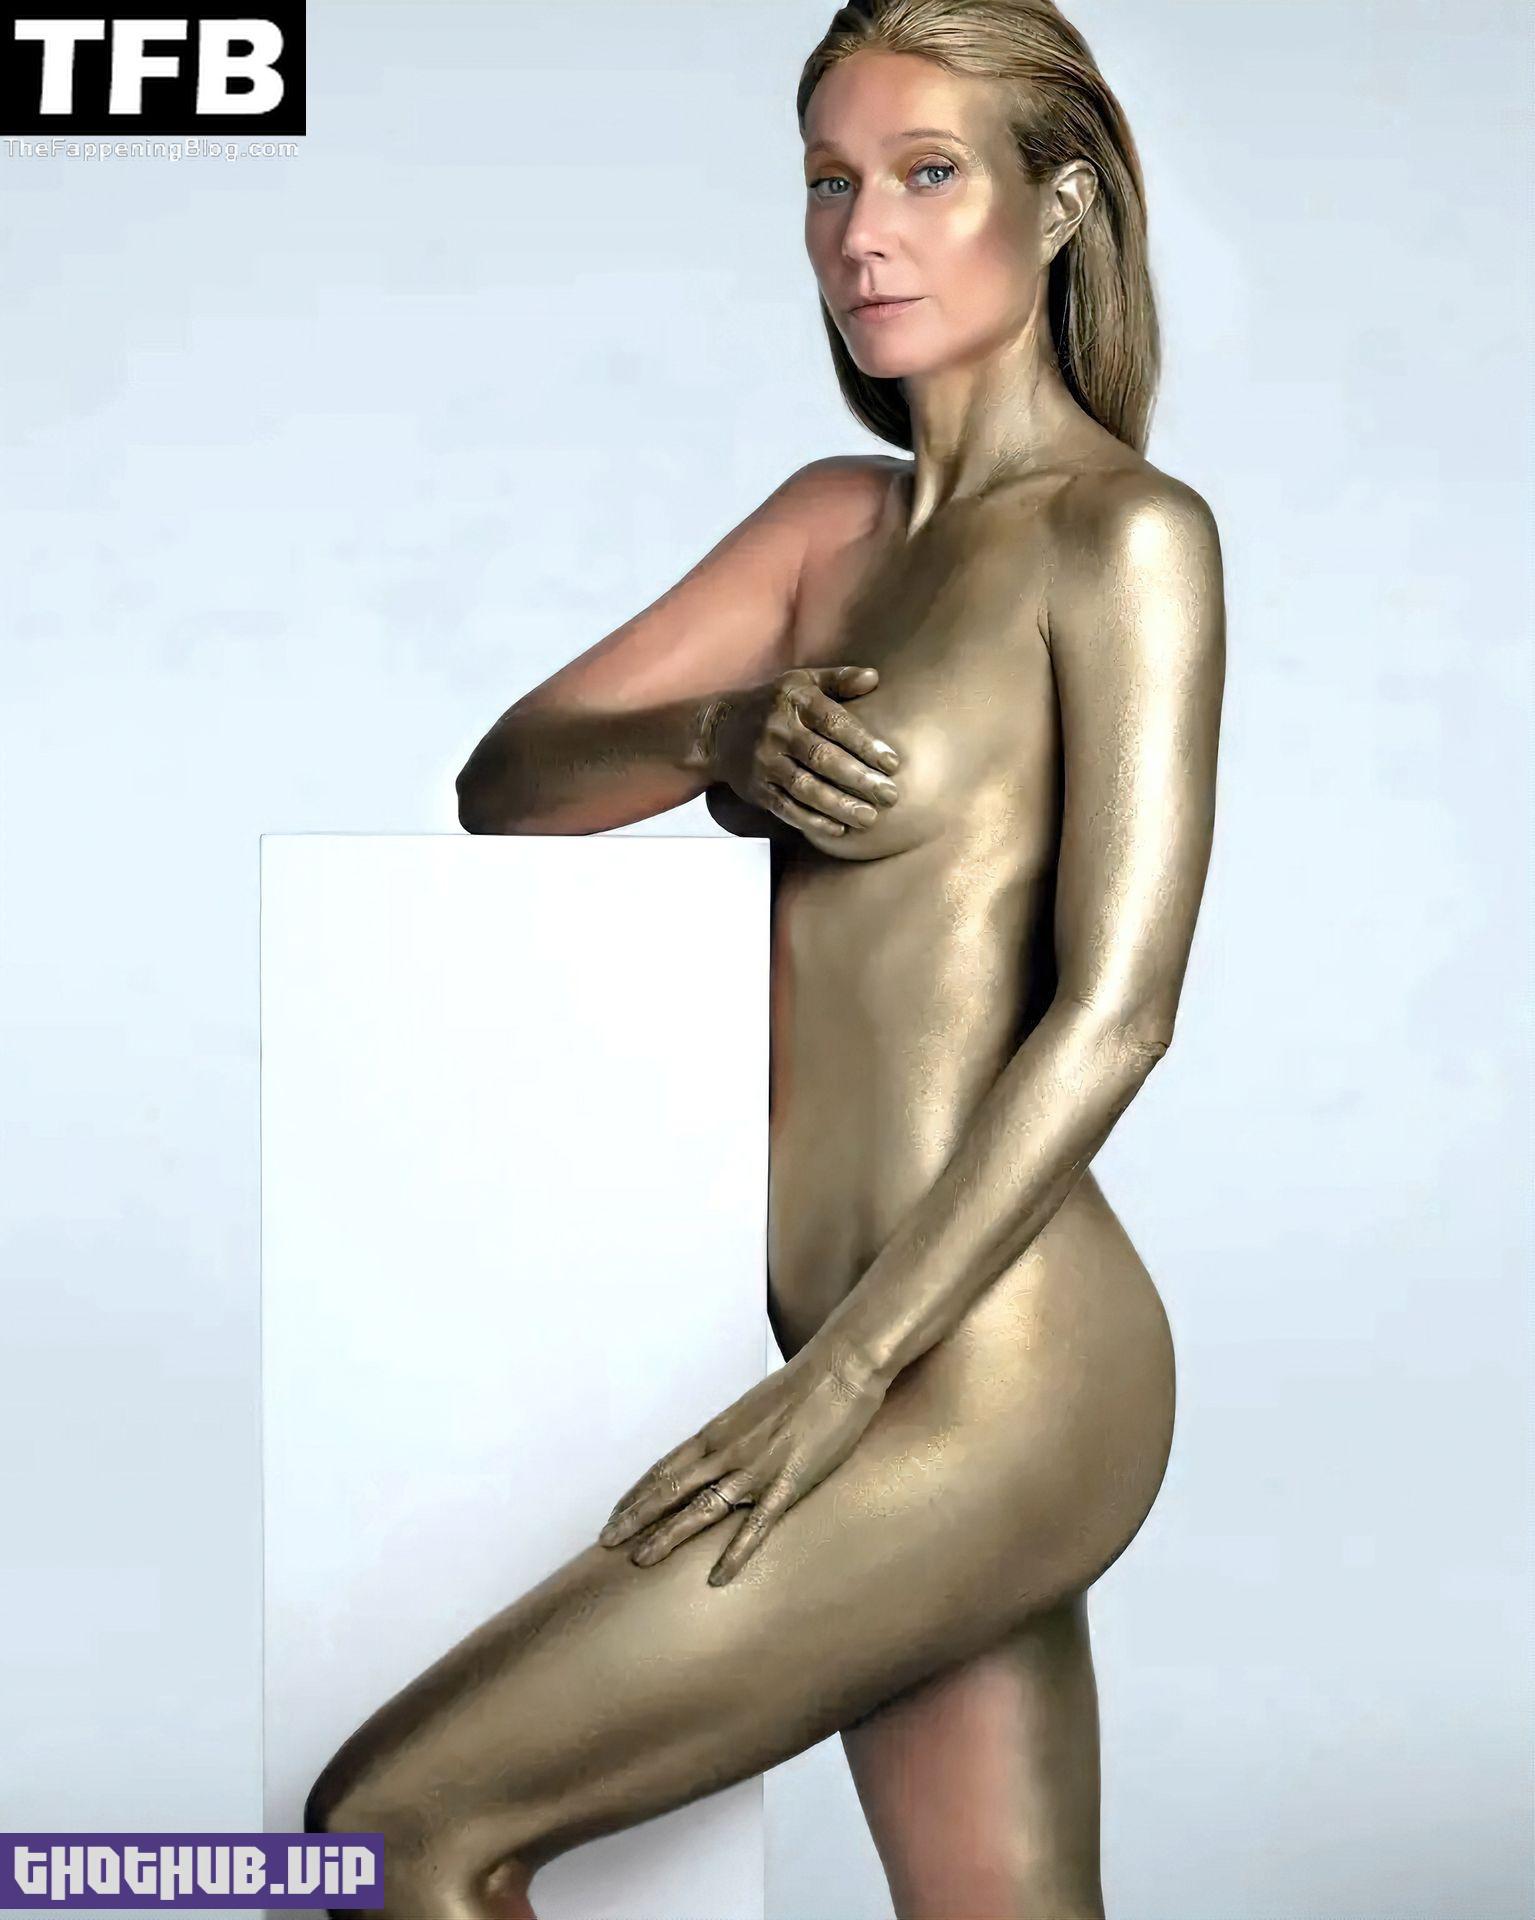 Gwyneth Paltrow Naked Bodypaint 3 1 thefappeningblog.com